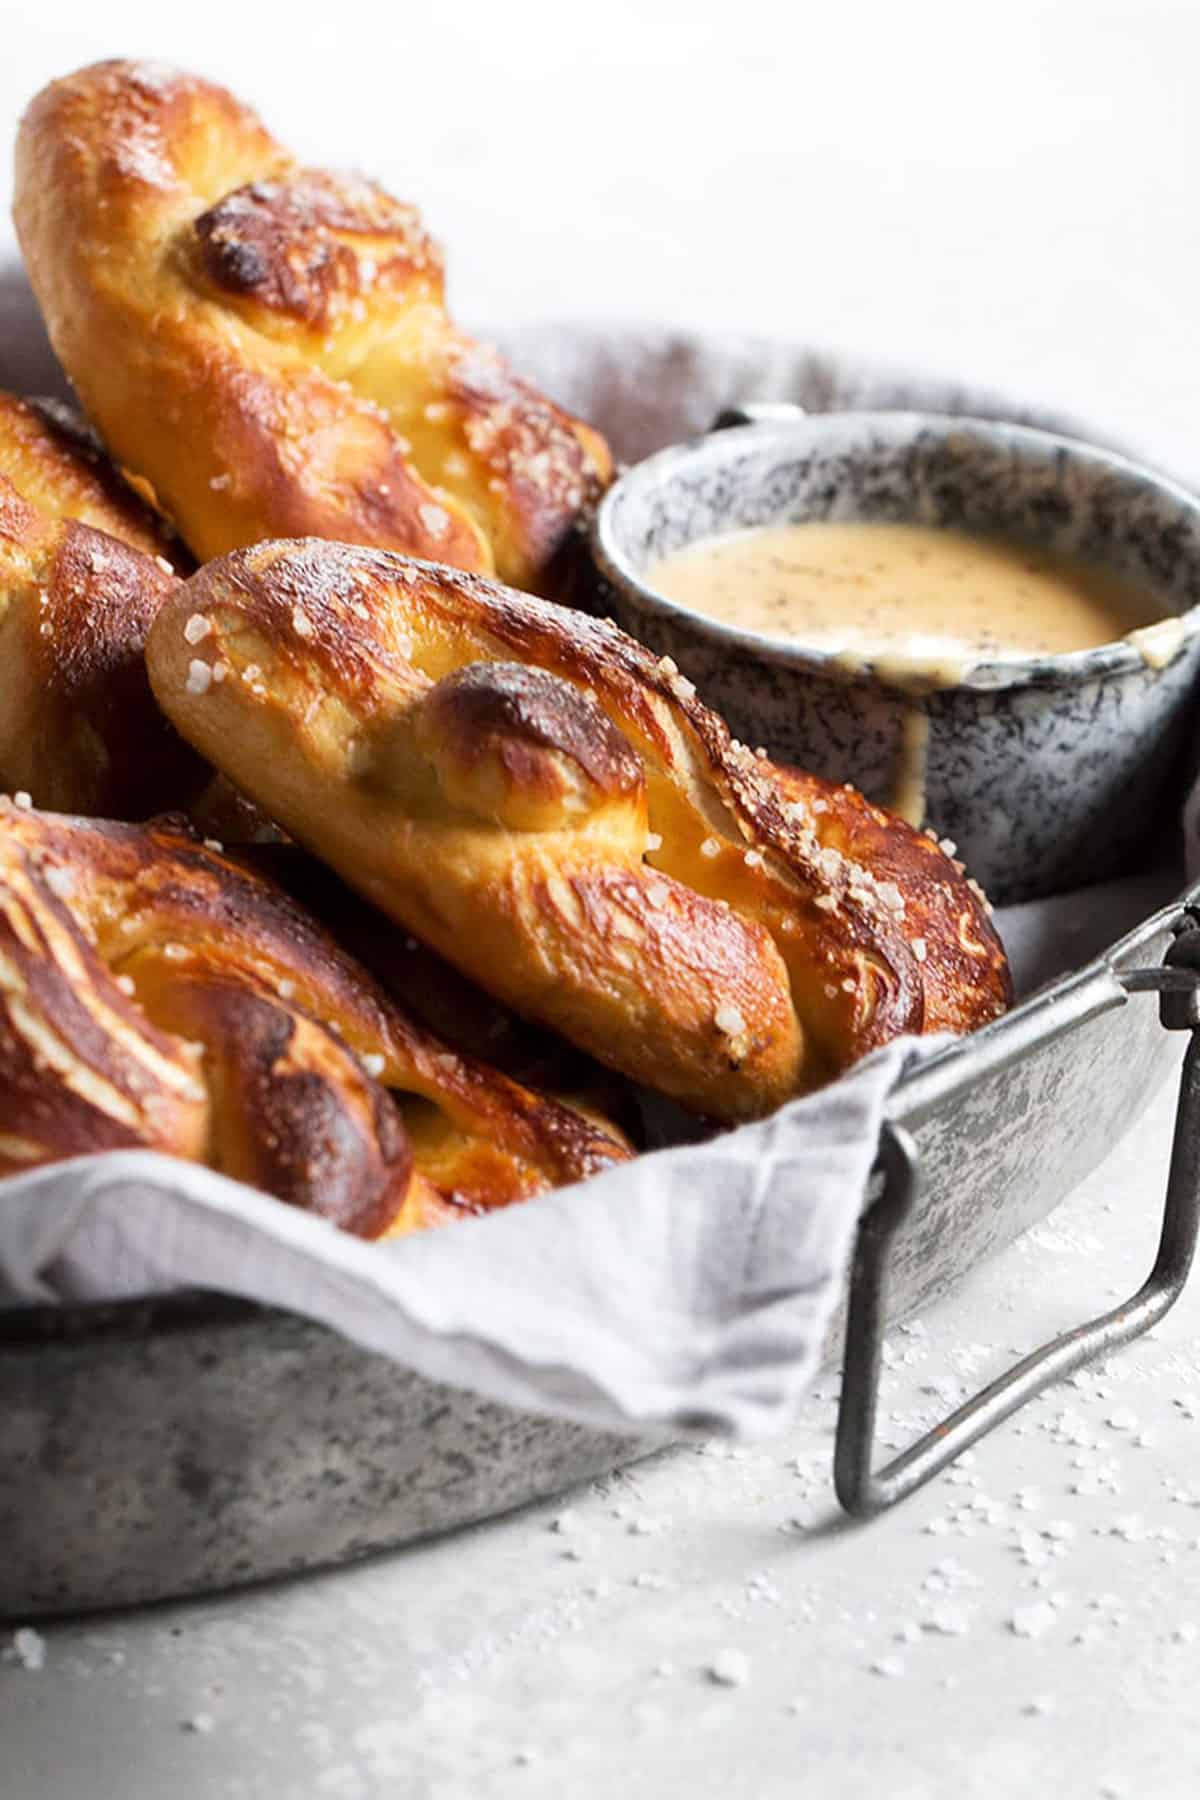 soft pretzels on tray with a cup of beer cheese